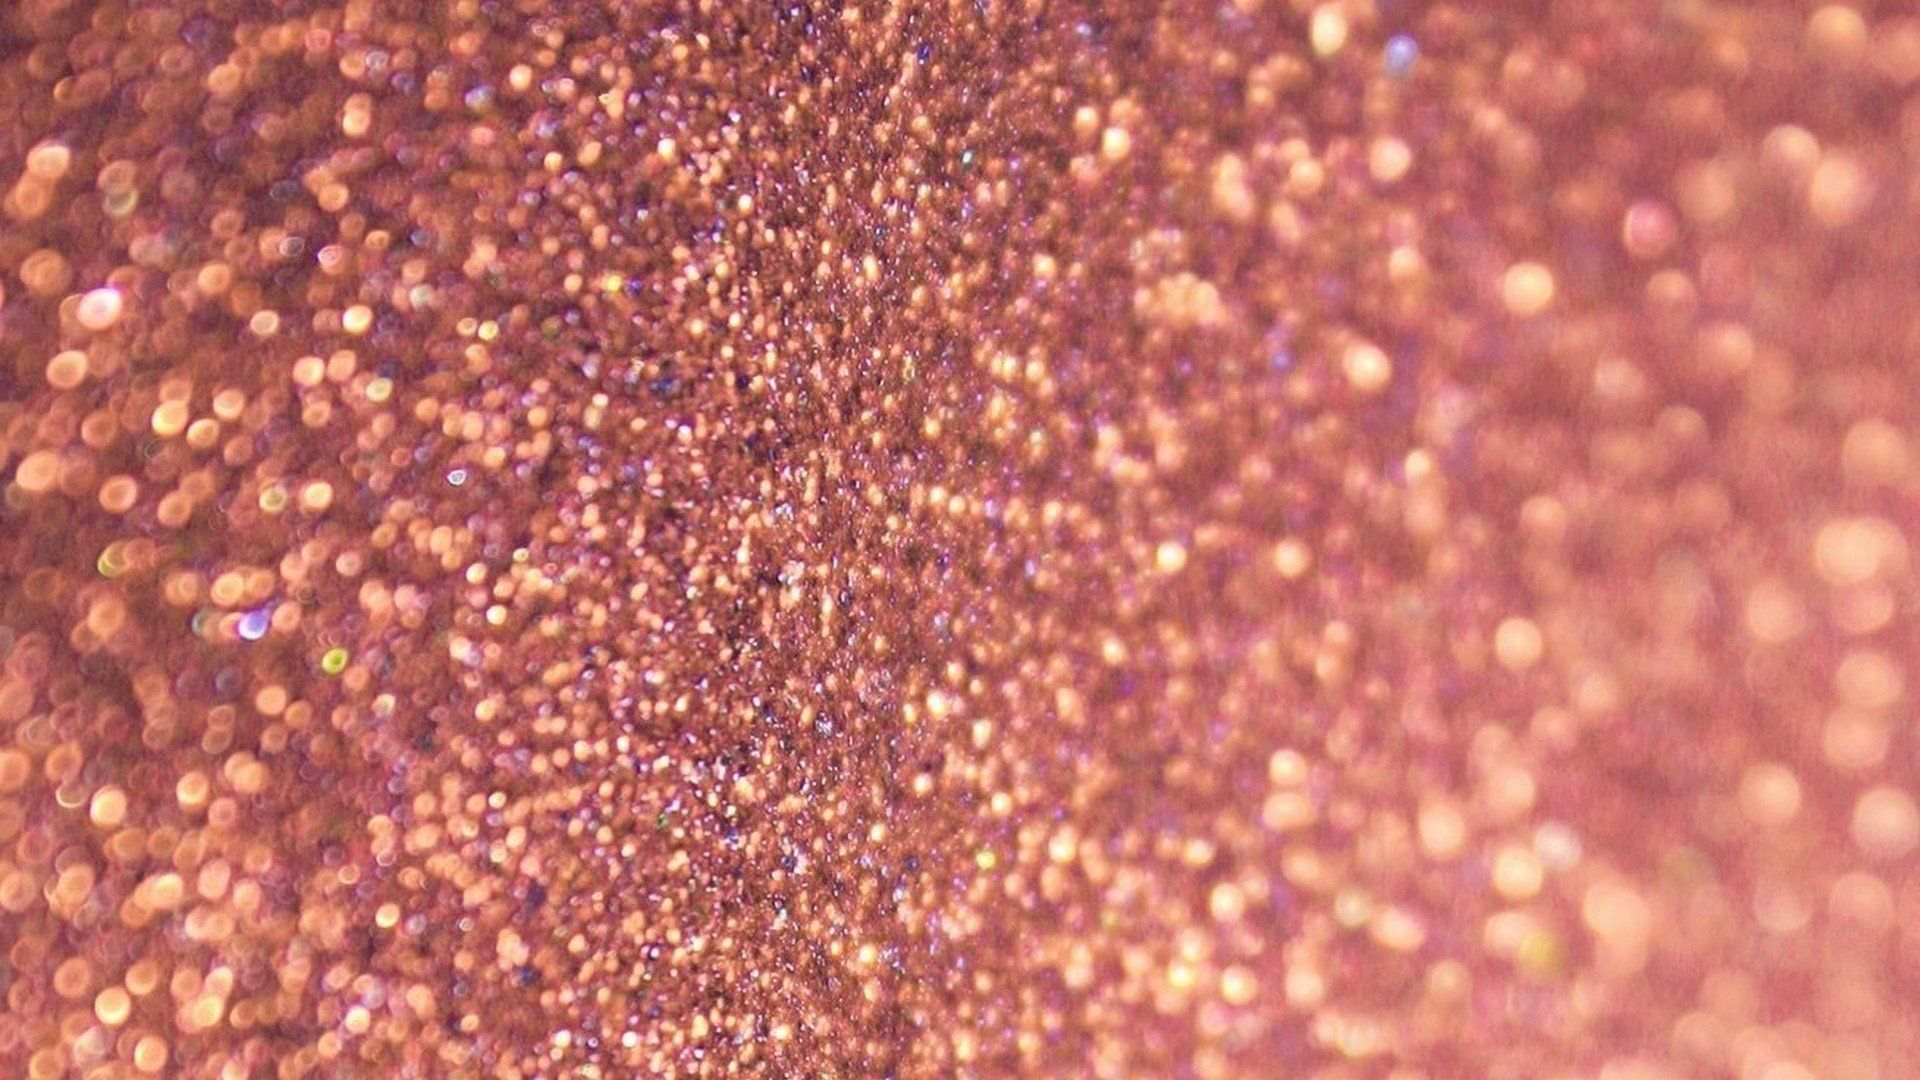 A close up of a glittery pink background - Rose gold, gold